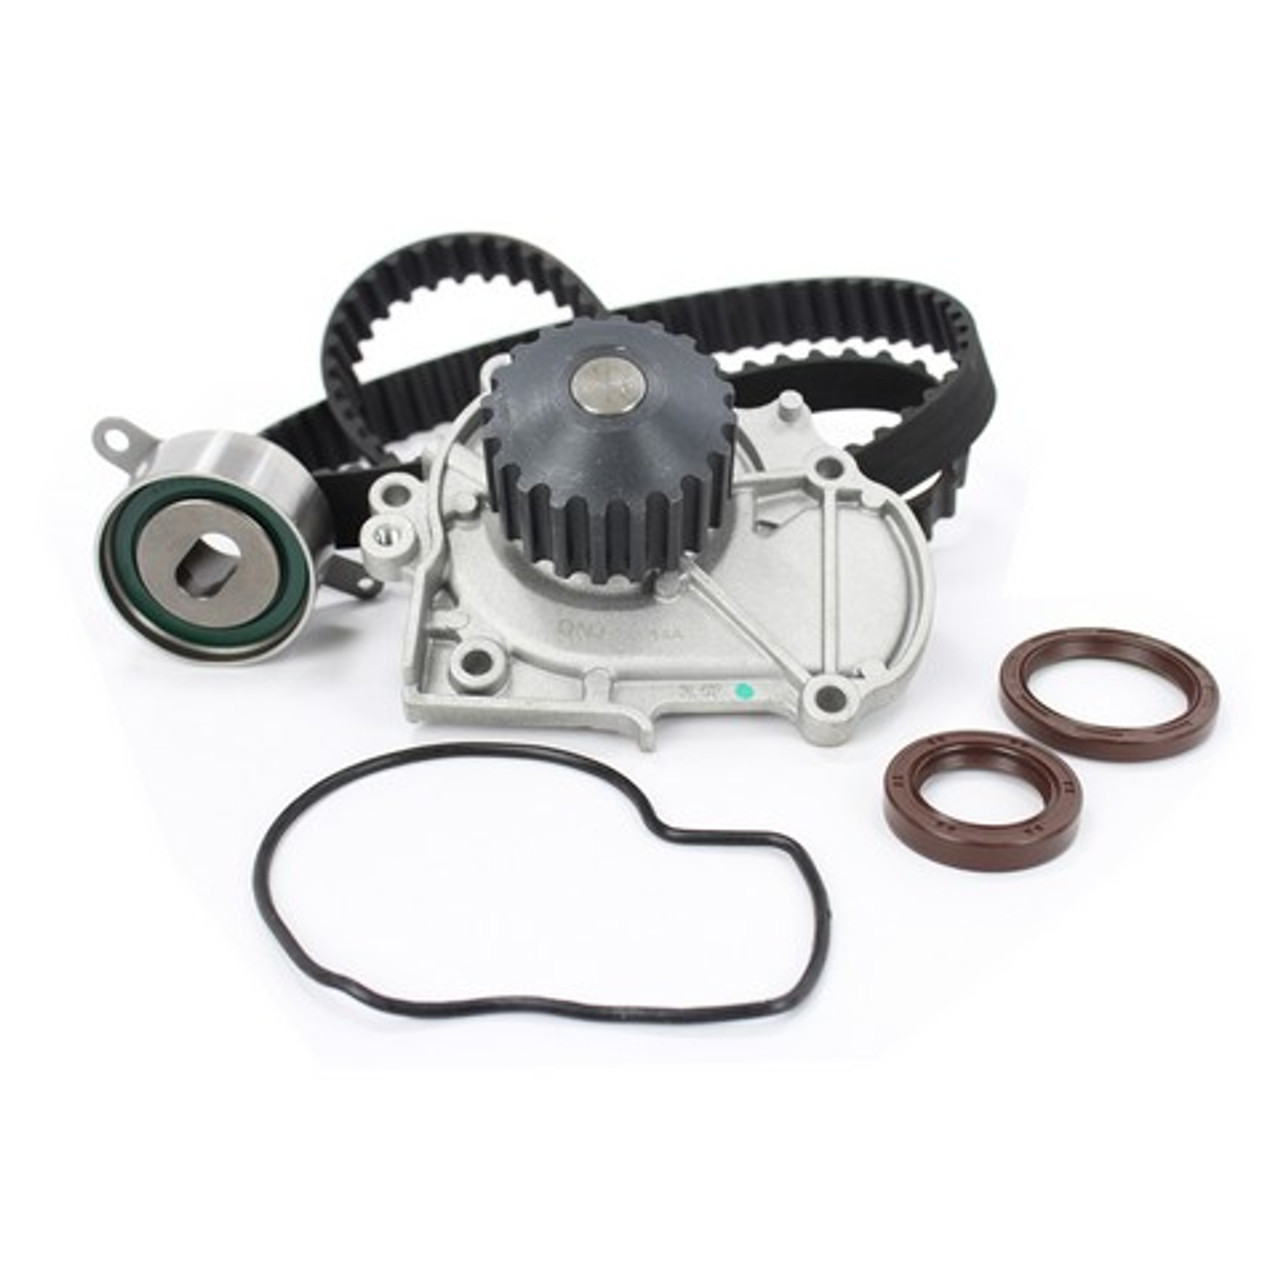 1998 Acura TL 2.5L Timing Belt Kit with Water Pump TBK253WP.E4